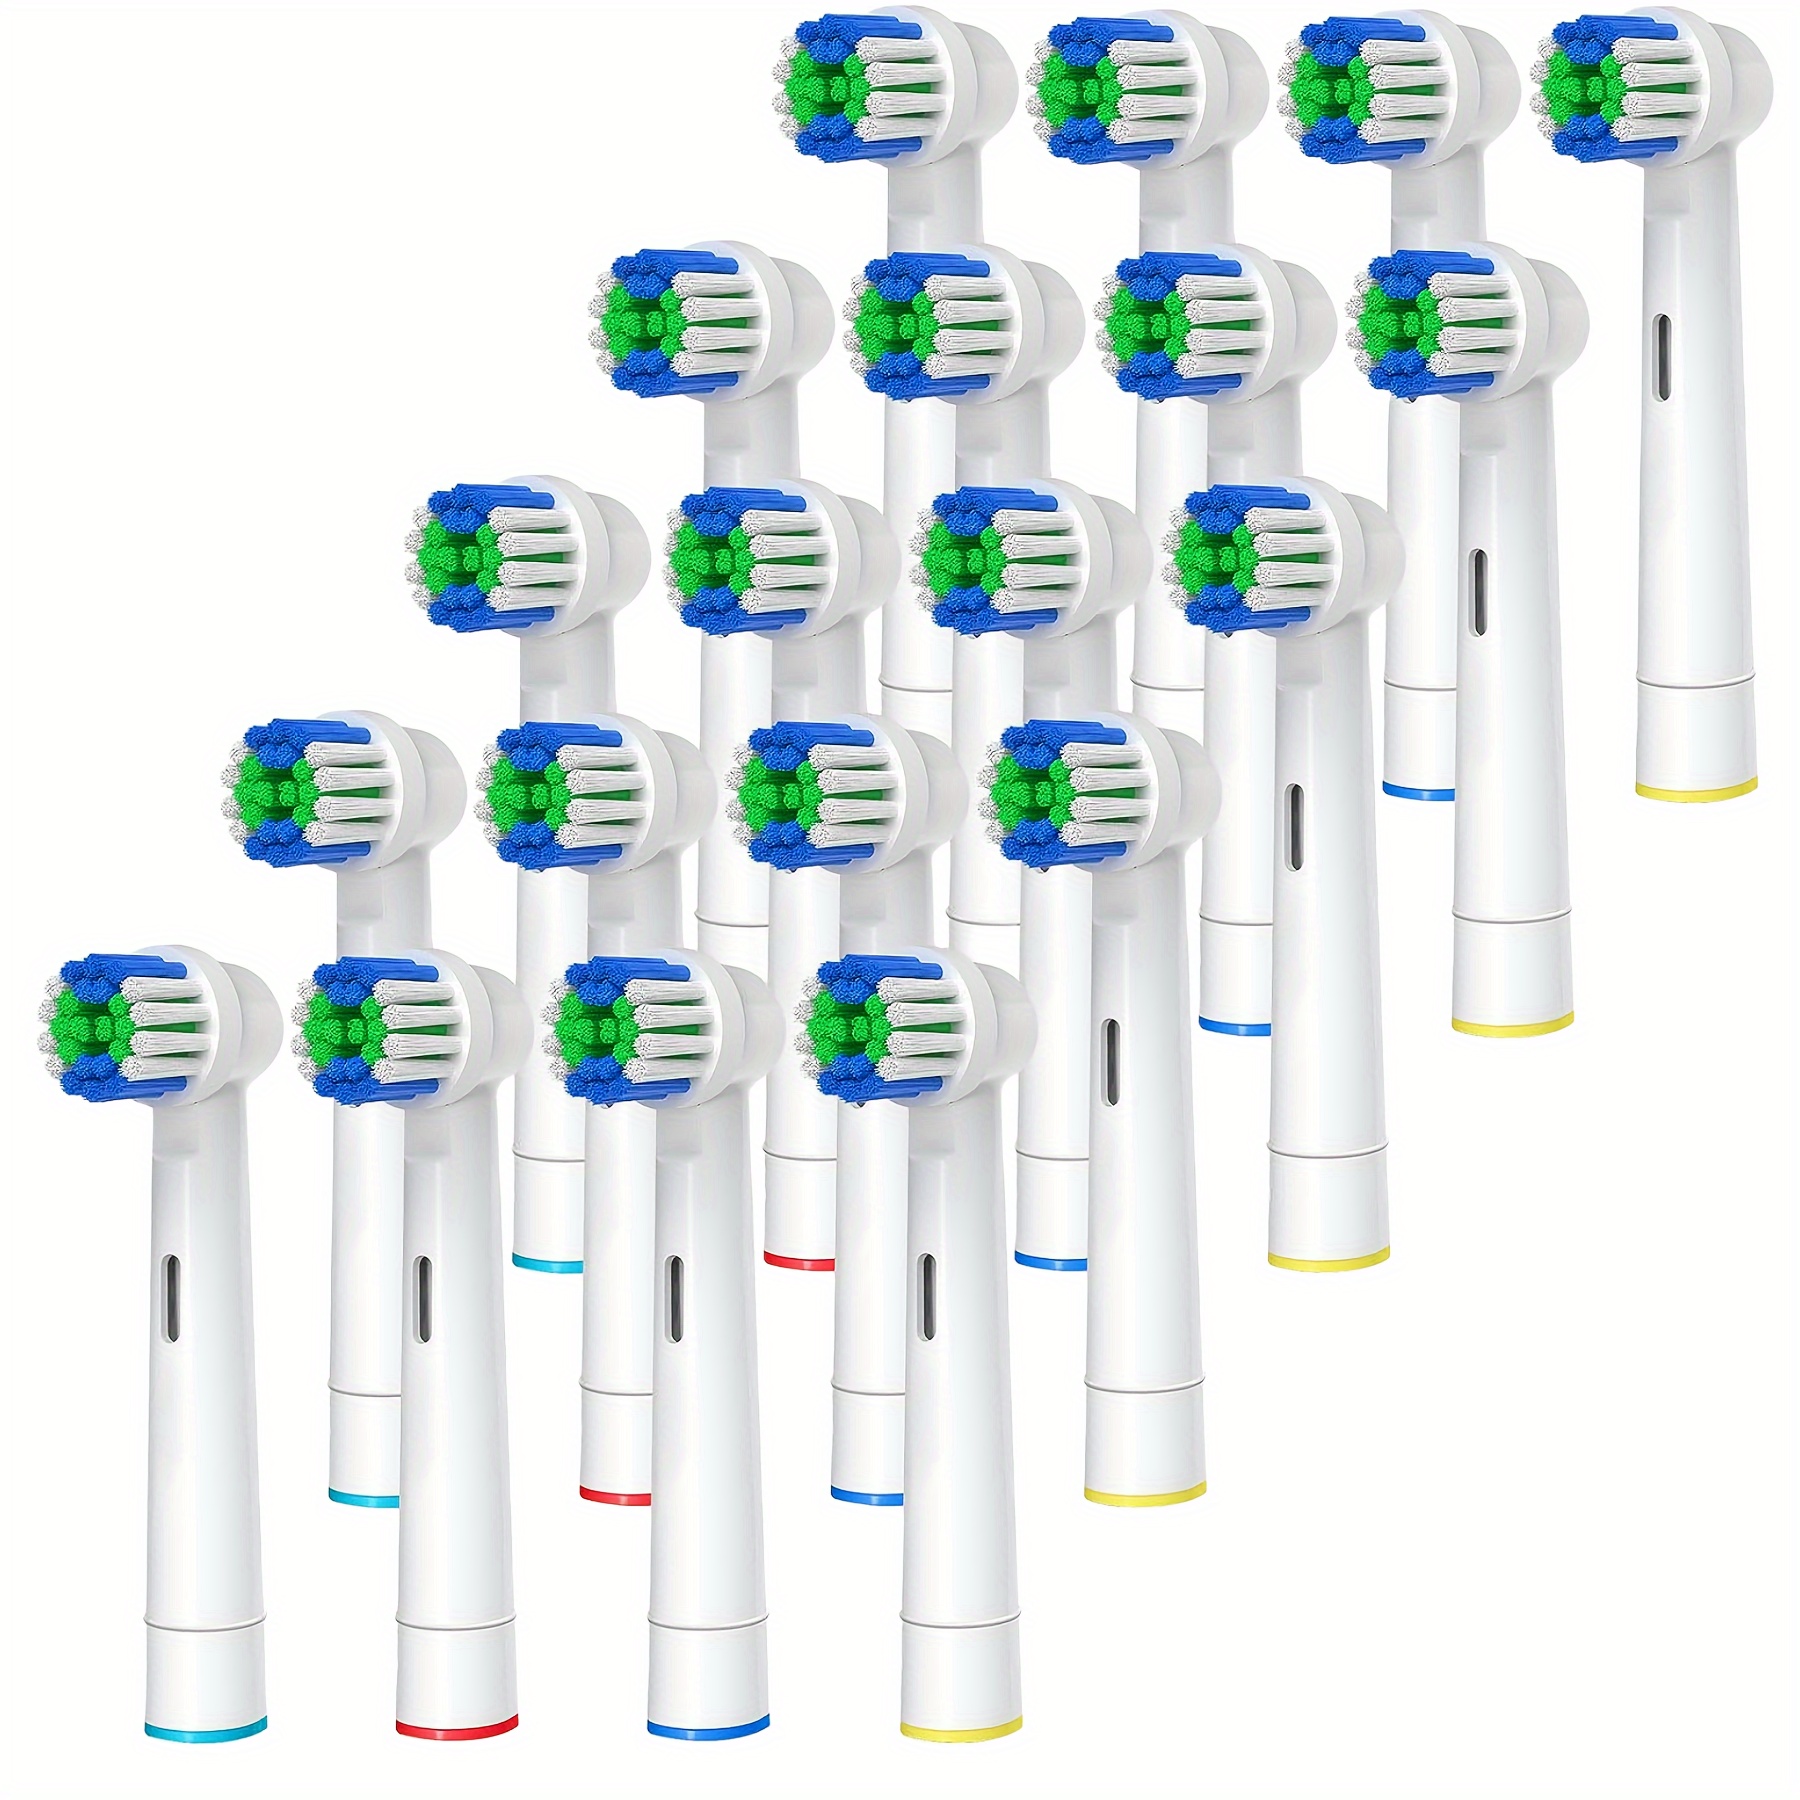 

Replacement Toothbrush Heads Compatible With Oral-b Braun, 20 Pcs Professional Electric Toothbrush Heads Brush Heads For Oral B Replacement Heads Refill Pro 500/1000/1500/3000/3757/5000/7000/7500/8000